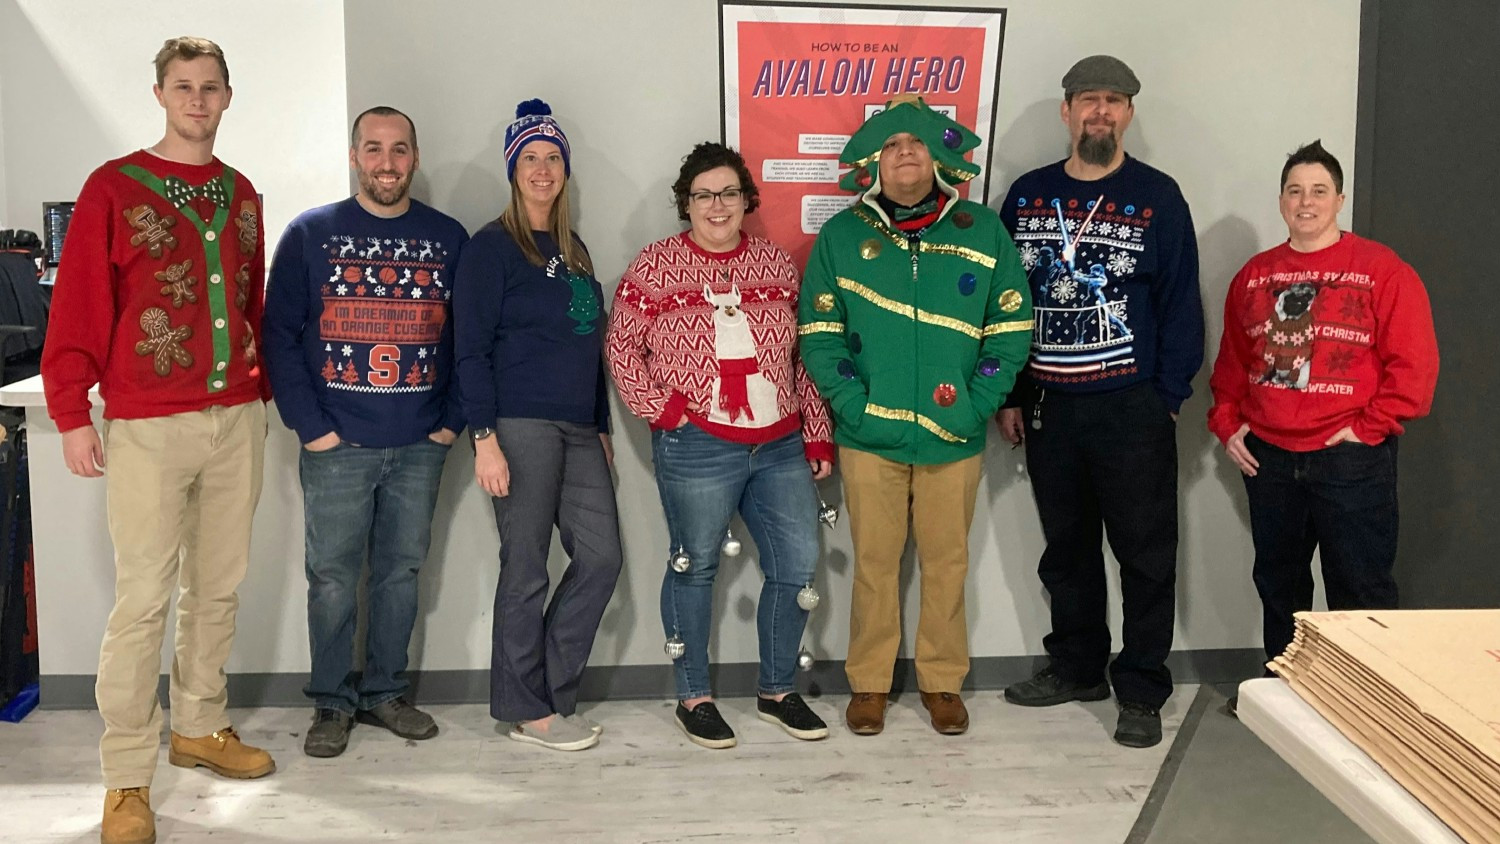 Avalon ugly holiday sweater contest.